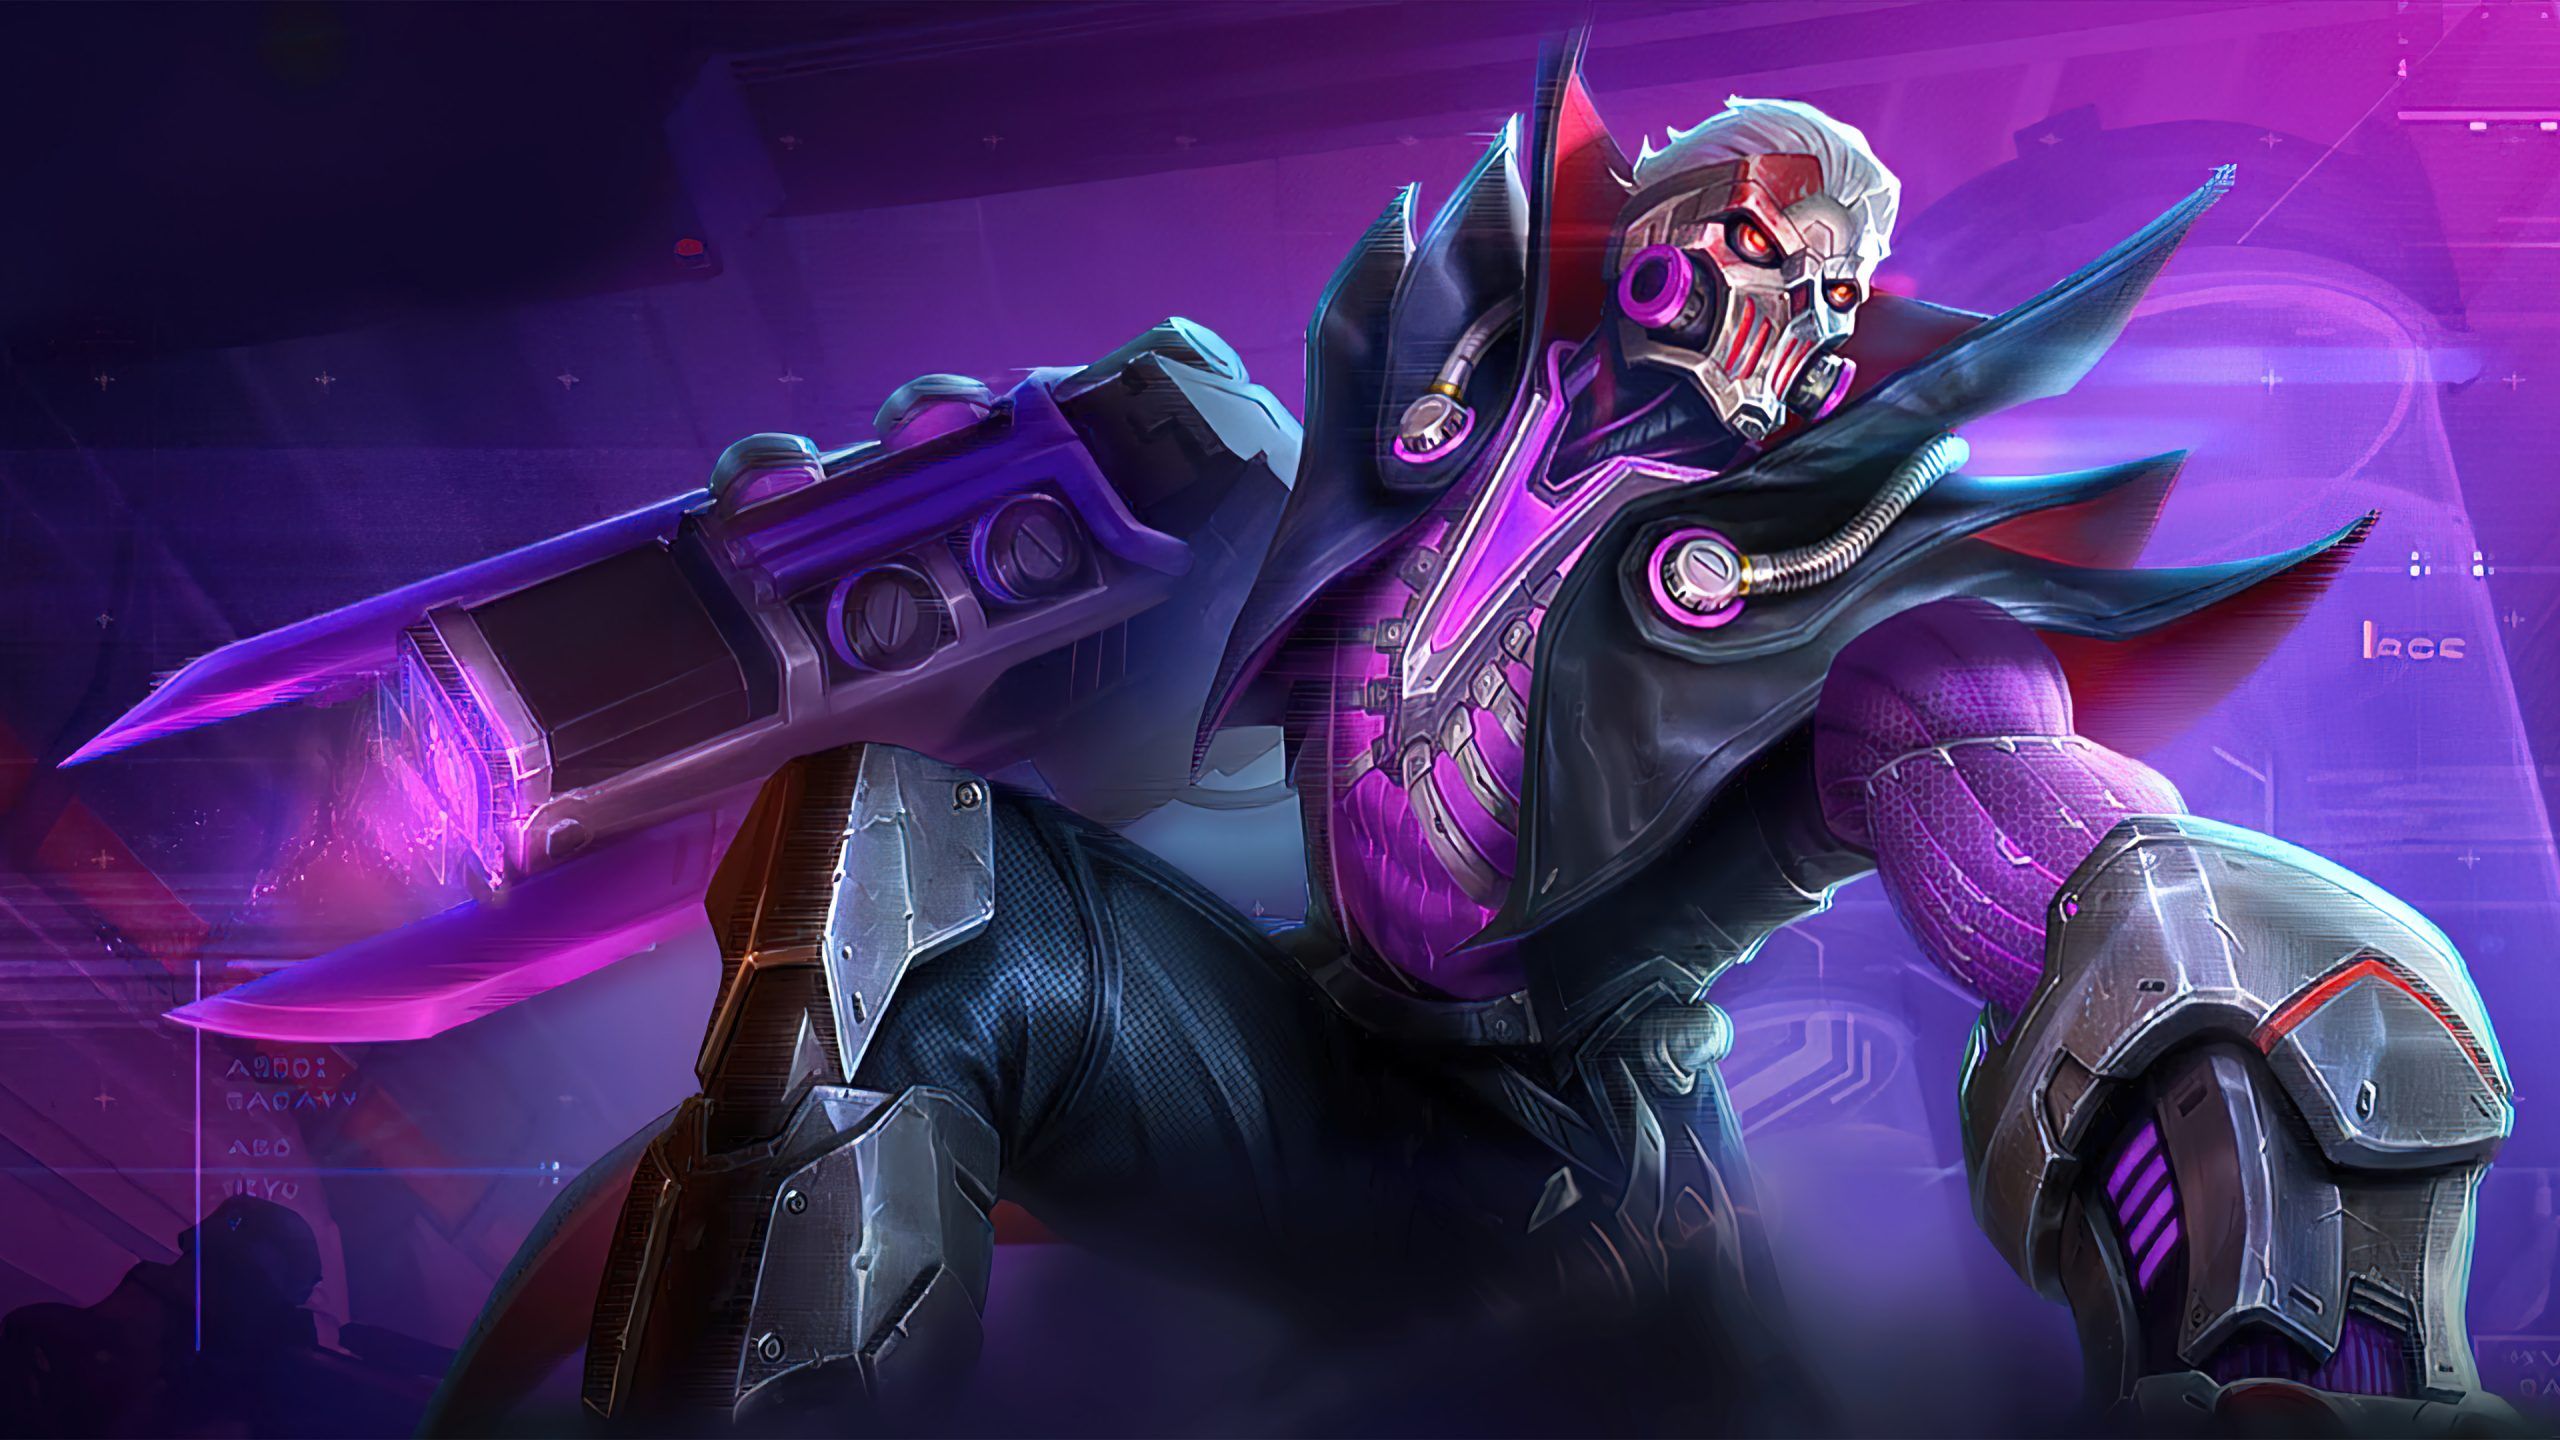 Wallpaper HD Roger Skin Edition Mobile Legends For PC and Phone